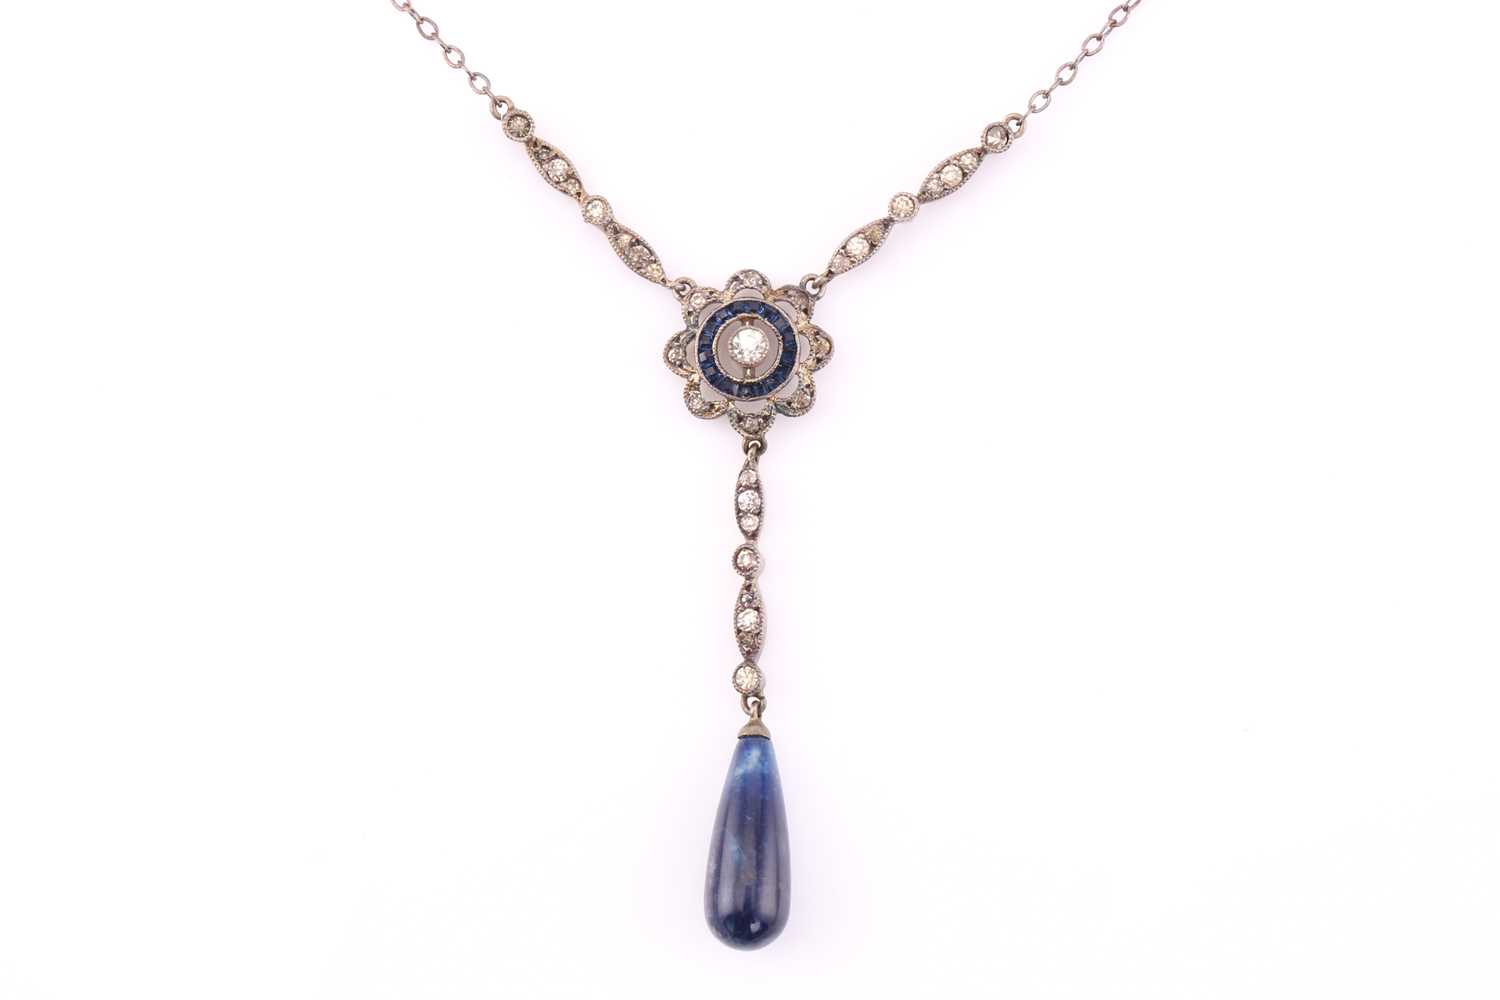 A silver drop necklace with blue and white stones, consisting of a target pendant and a sodalite